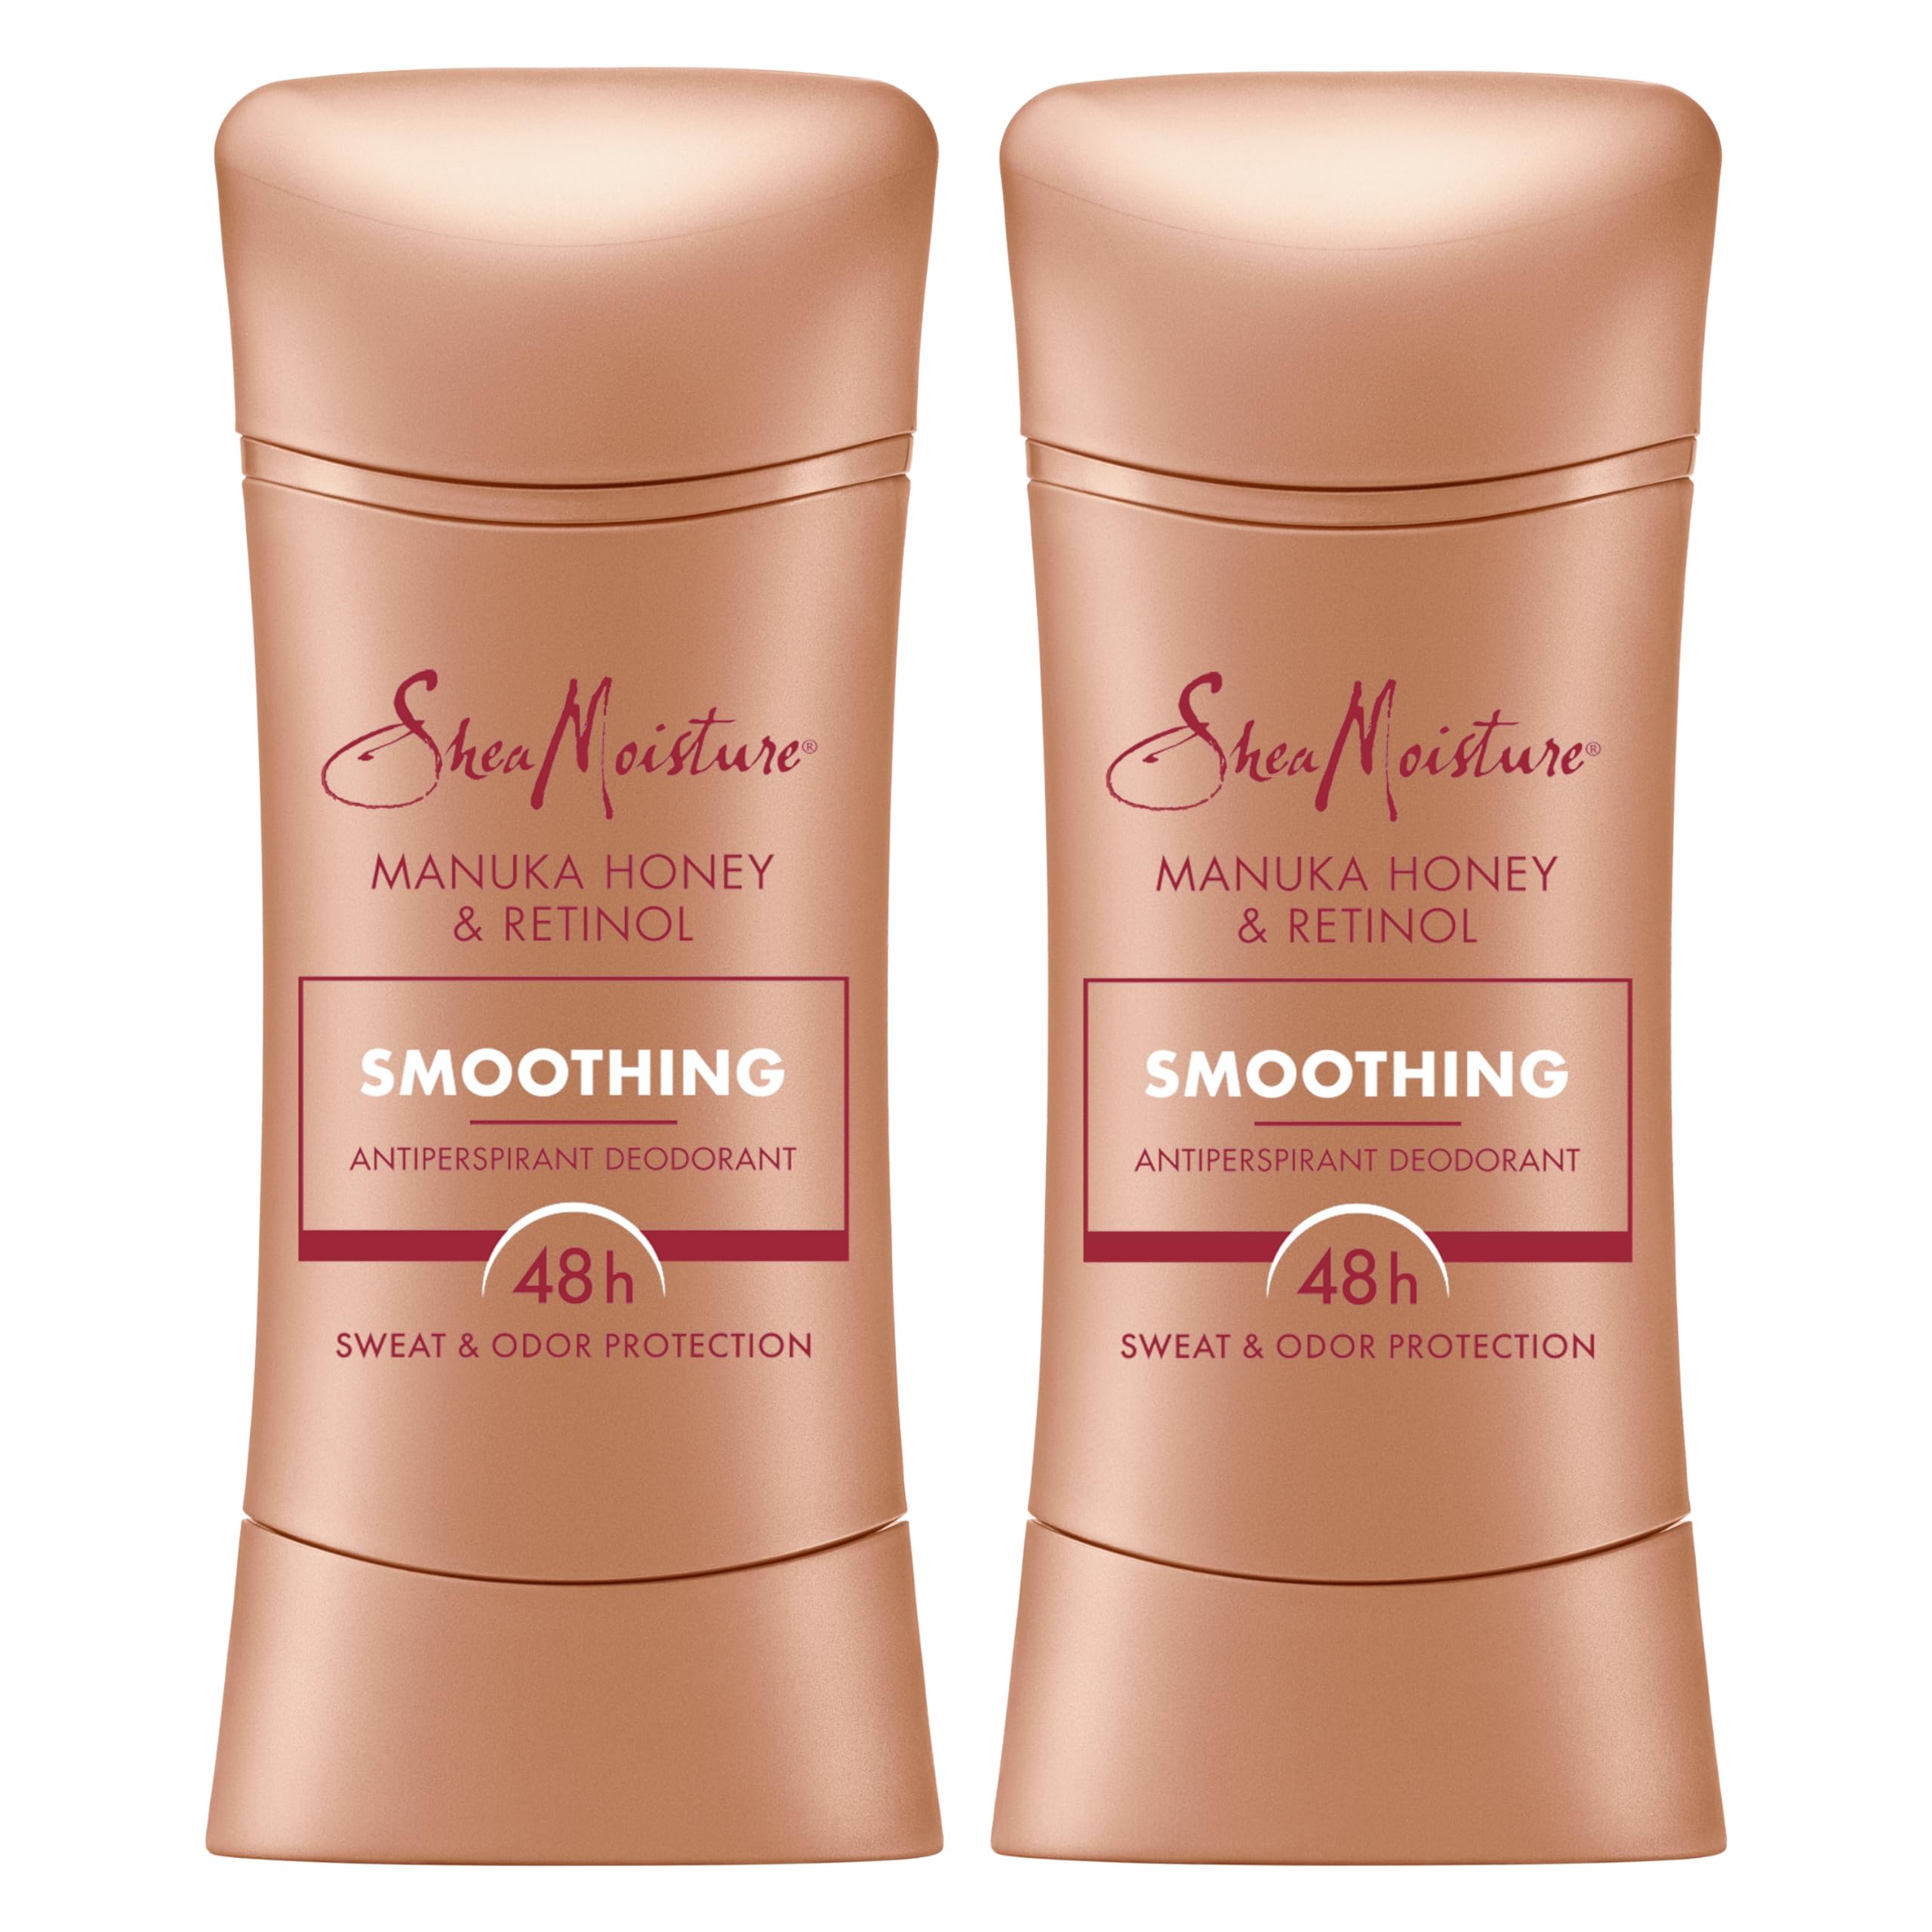 SheaMoisture Antiperspirant Deodorant Stick Smoothing Manuka Honey & Retinol 2 Count for 48HR Sweat & Odor Protection with No Parabens & No Mineral Oil 2.6 oz